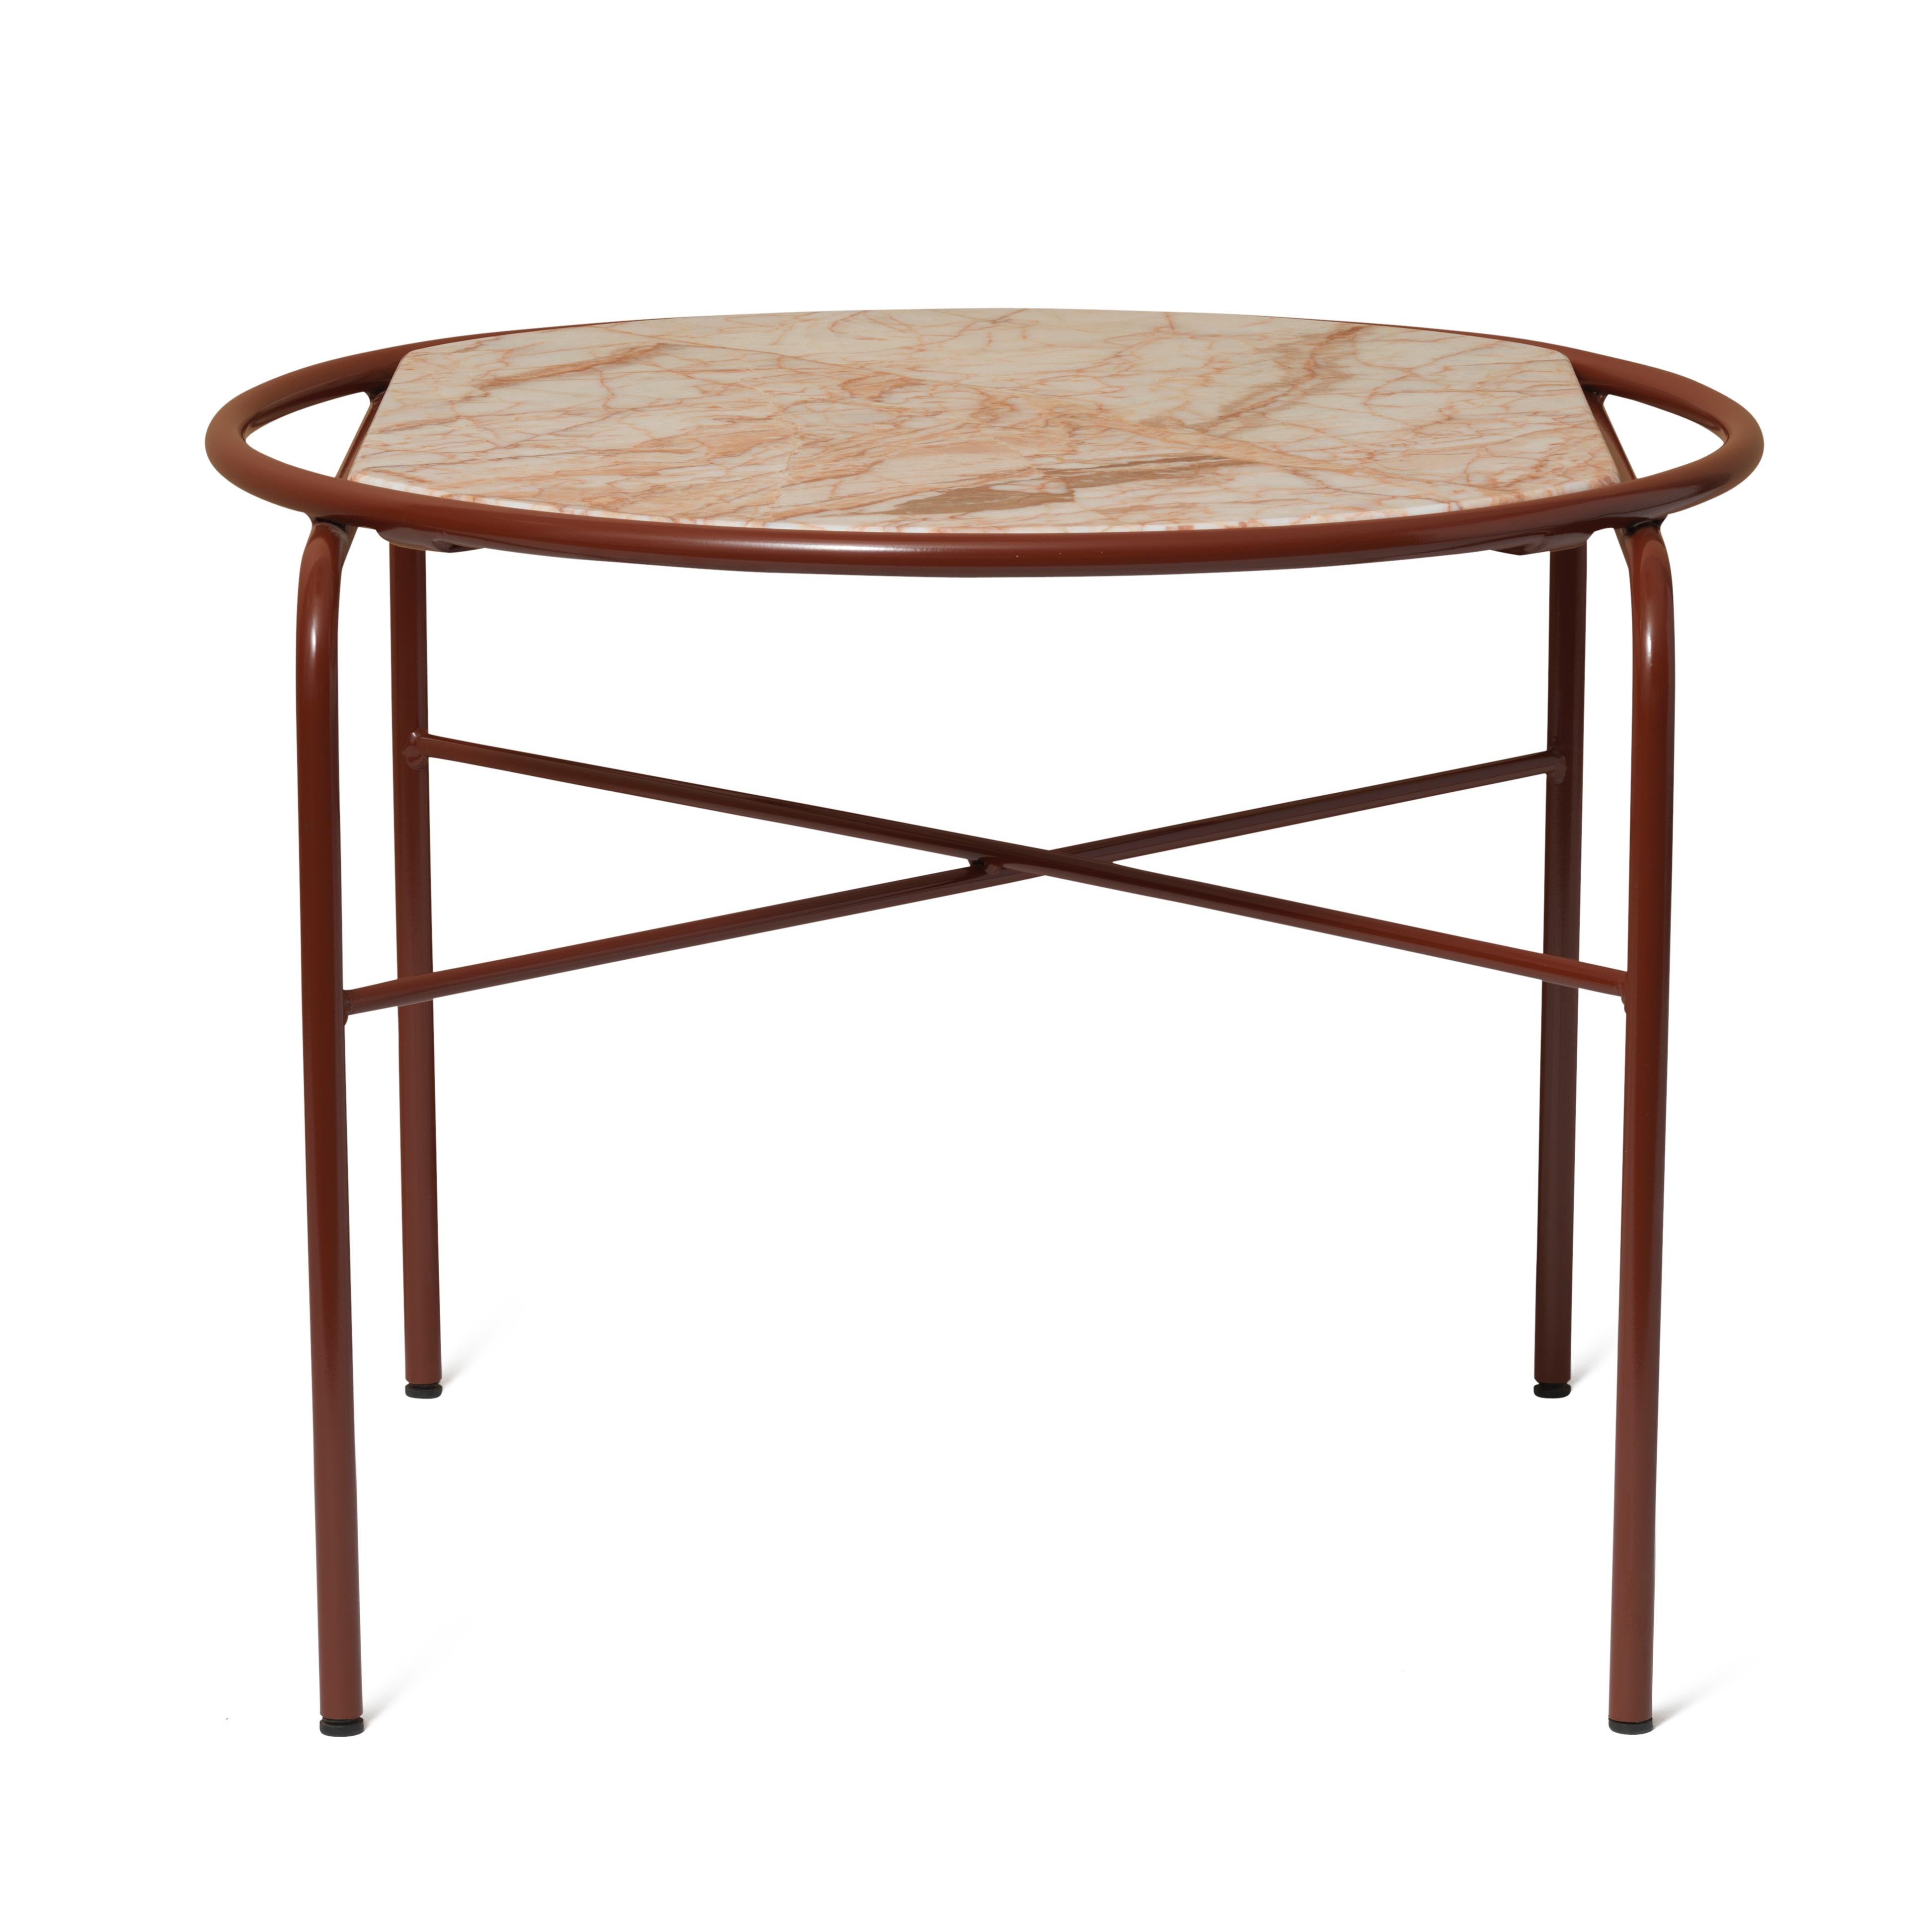 For Sale: Pink (Marble pink) Secant Circle Table in Steel Frame, by Sara Wright Polmar from Warm Nordic